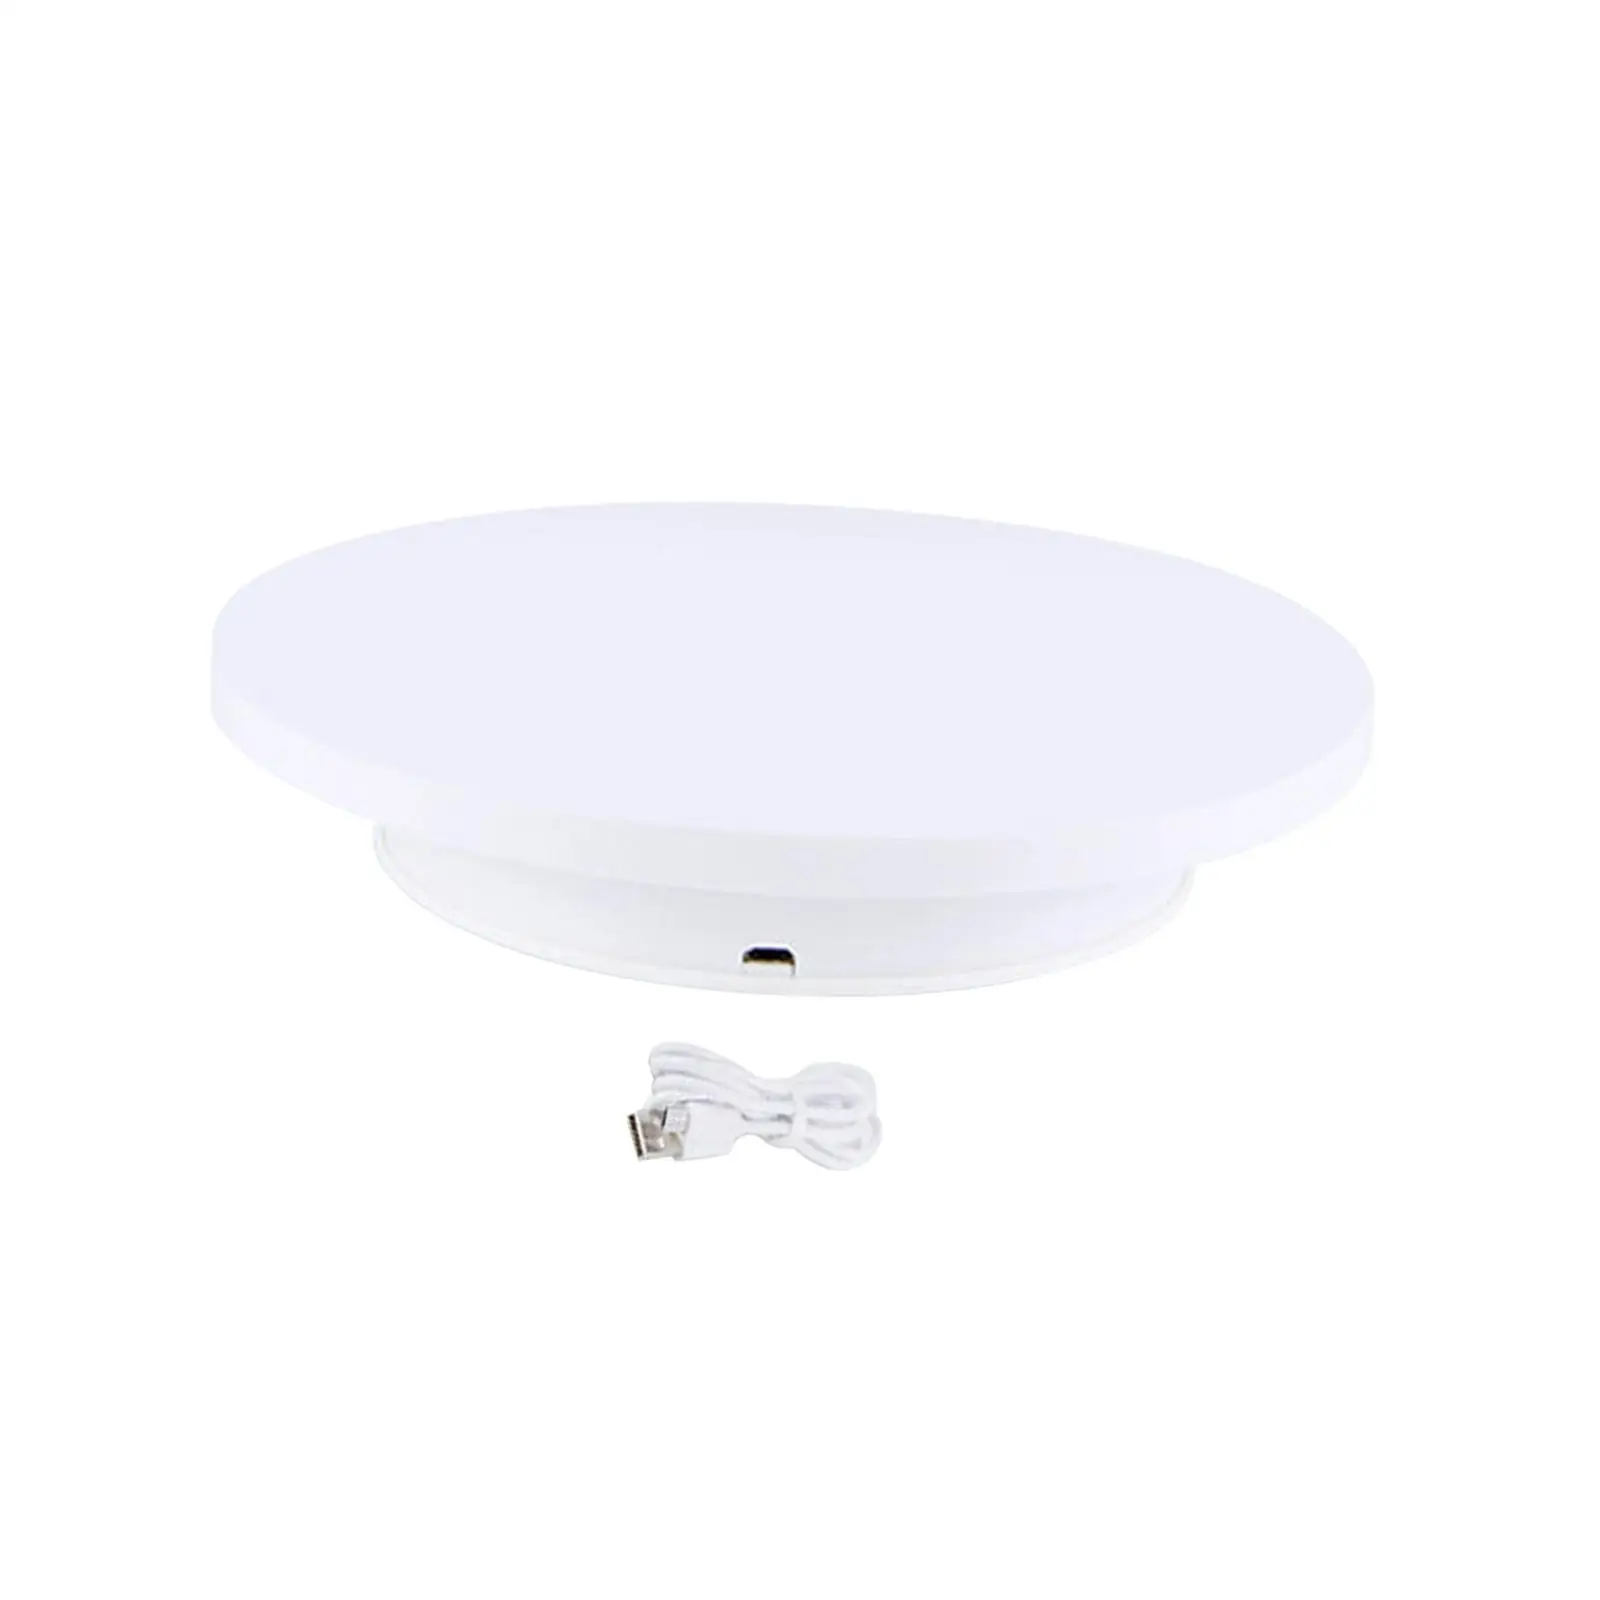 Electric 360 Degree Rotating Display Stand Rotating Turntable Jewelry Holder for Cake